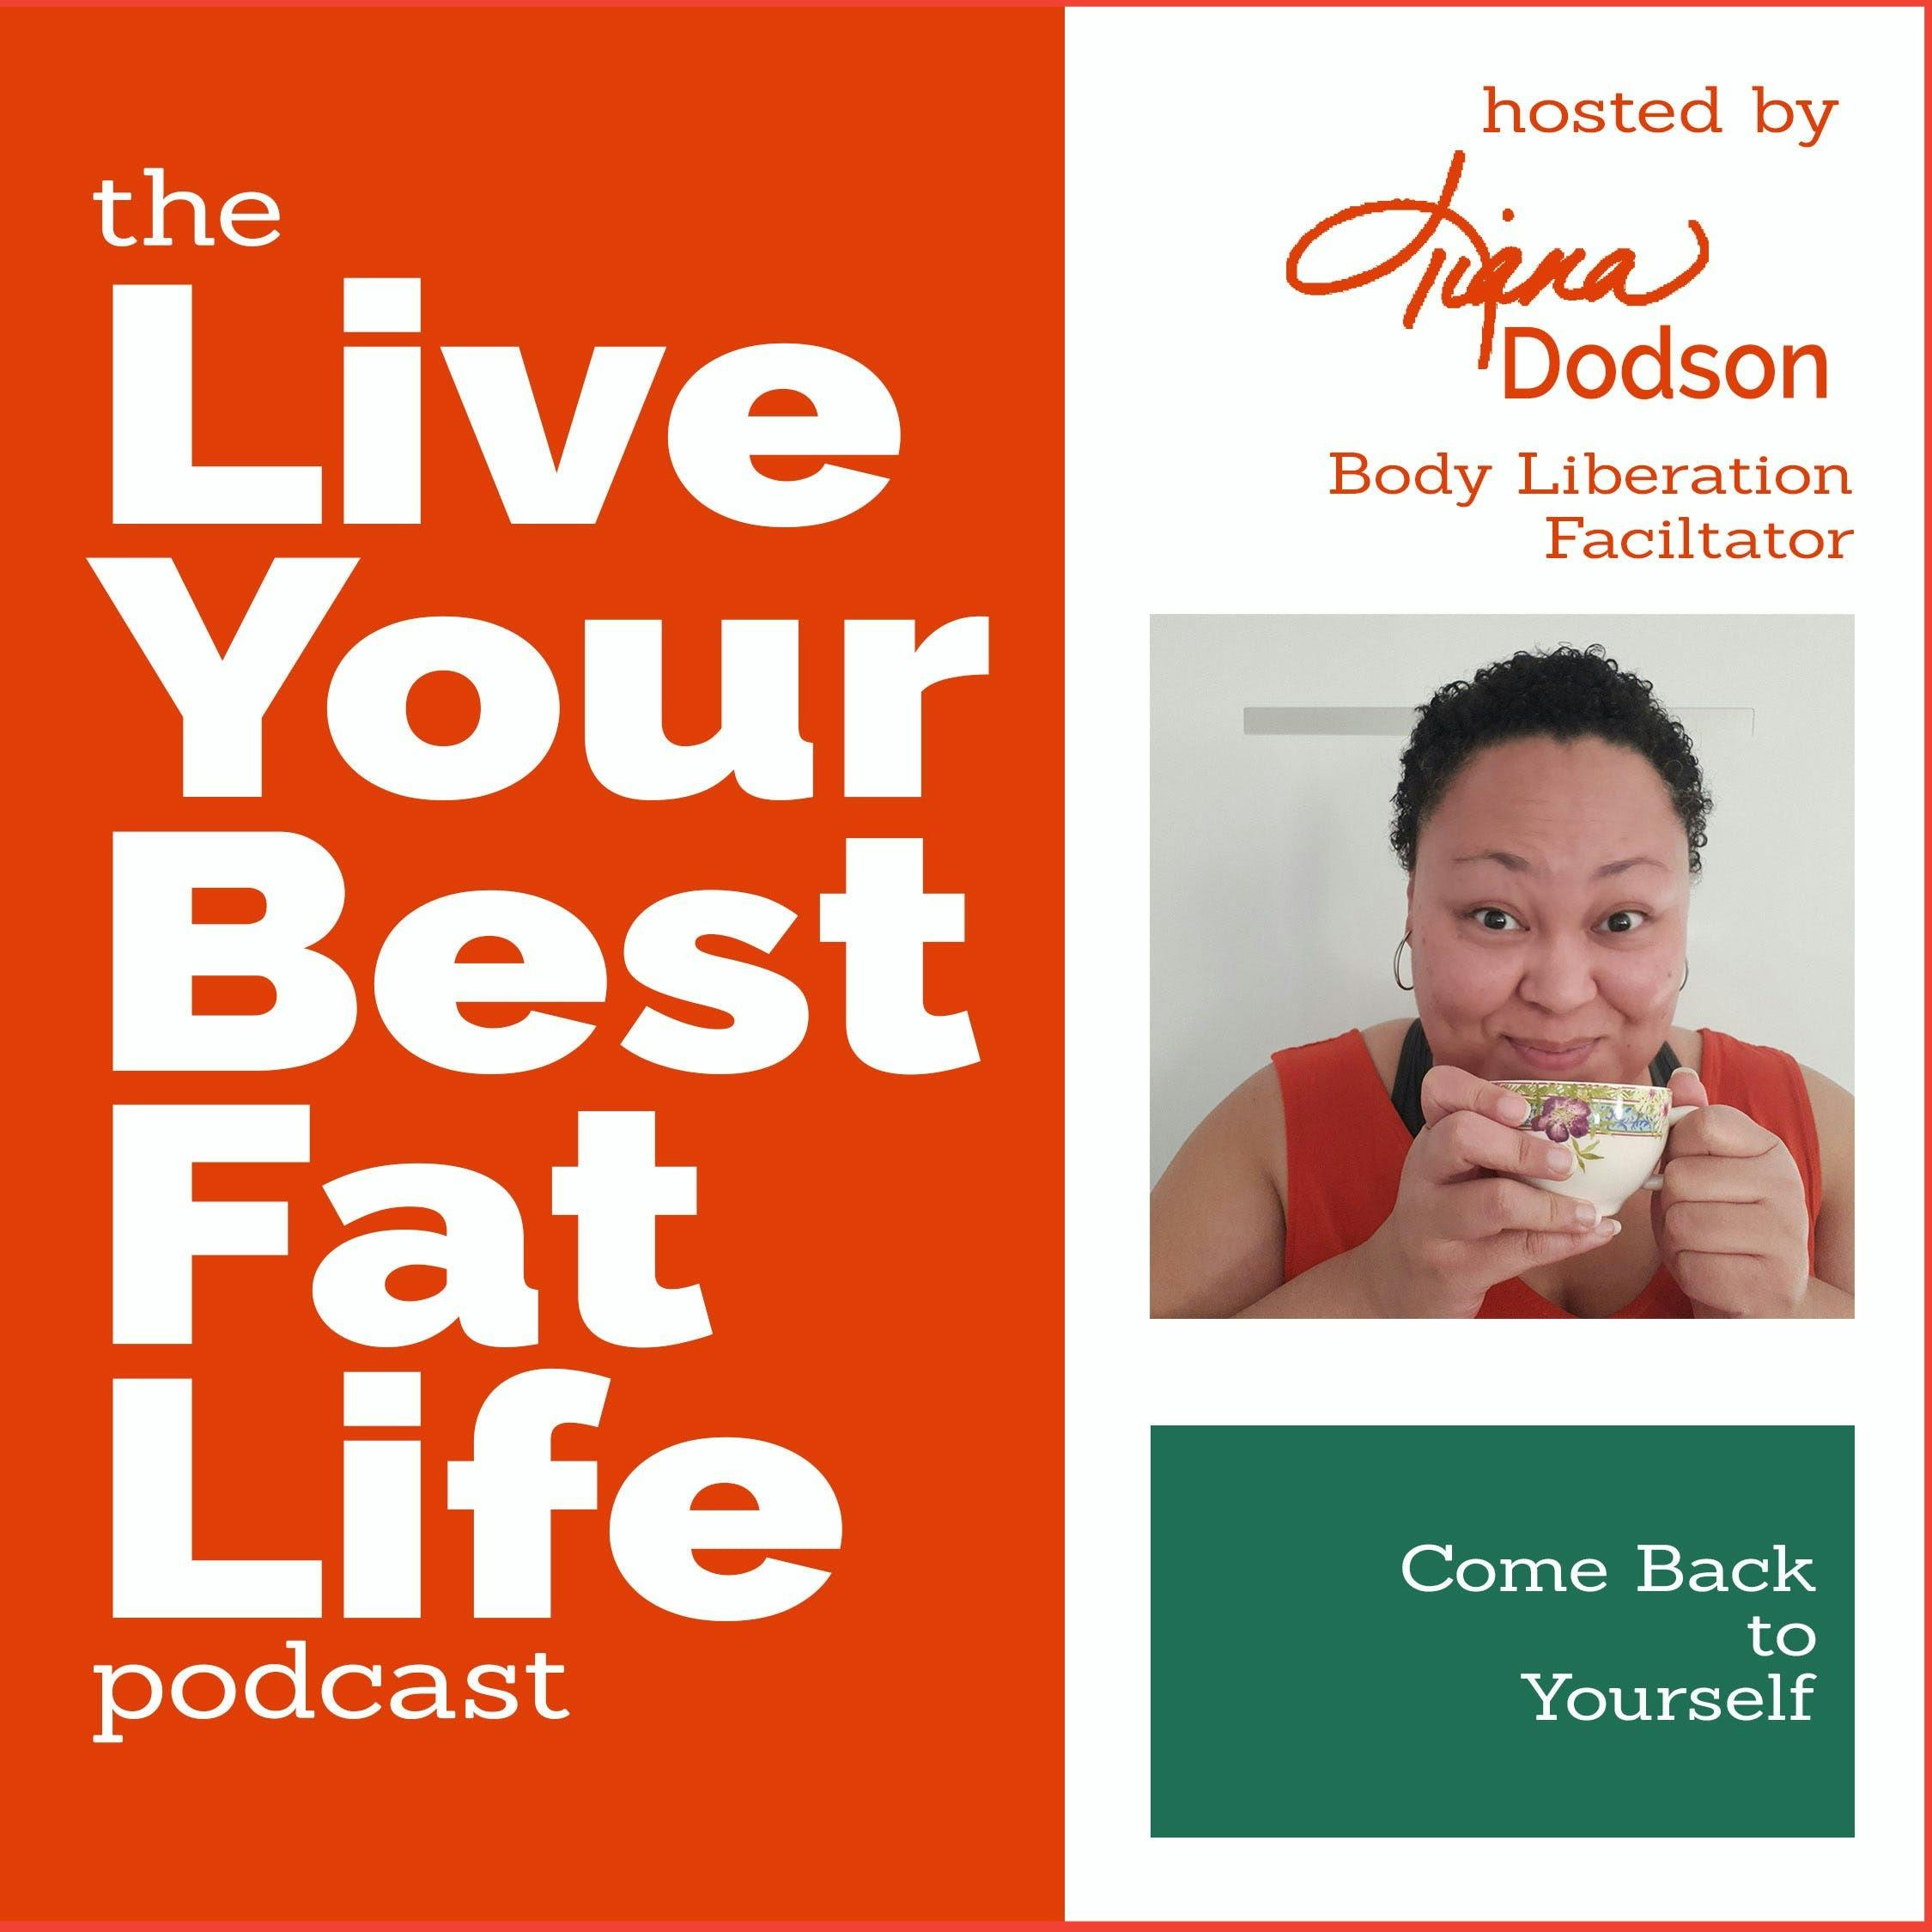 podcast episode art that has the words the live your best fat life podcast in white letters over an orange background to the left of orange text reading hosted by Tiana Dodson Body Liberation Facilitator above a headshot of Tiana above the words Come Back to Yourself in white over a green rectangle